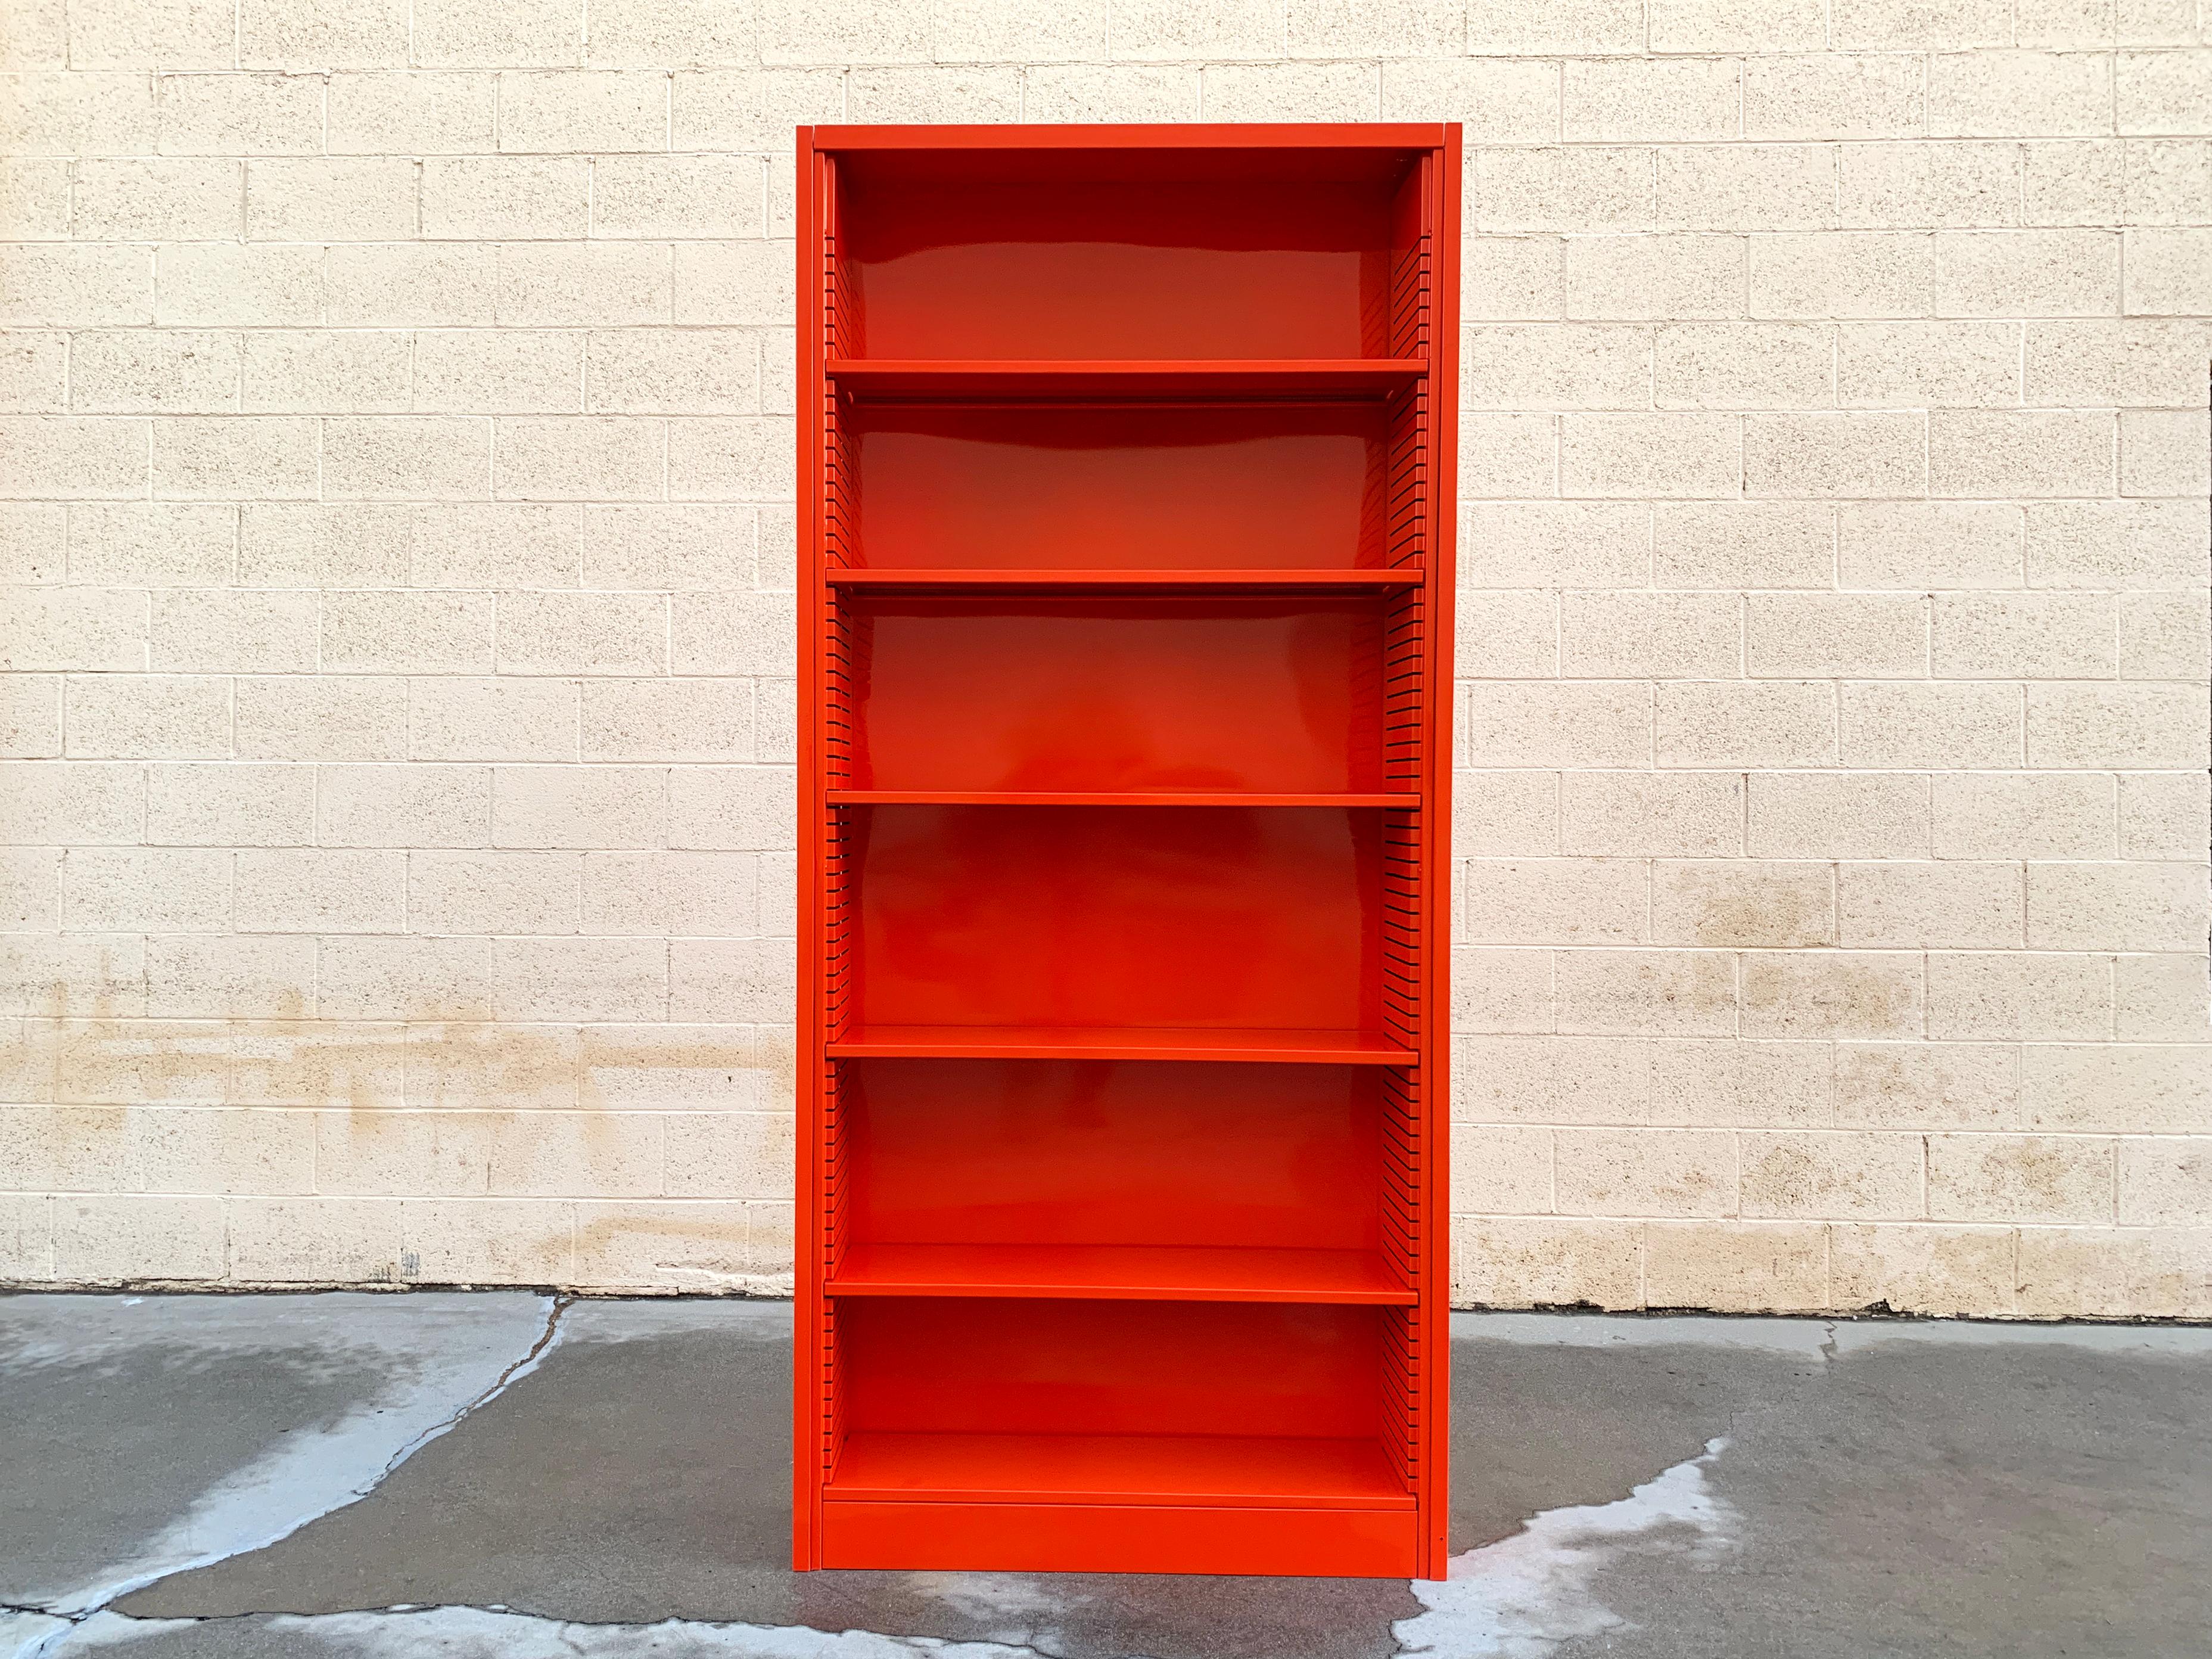 It's the 1970s tall tanker bookcase refinished in high Safety Orange (OG26). This minimal, unit with six adjustable shelves, is perfect for storage and display. In excellent refinished condition with gentle wear to the steel based on age. 

This